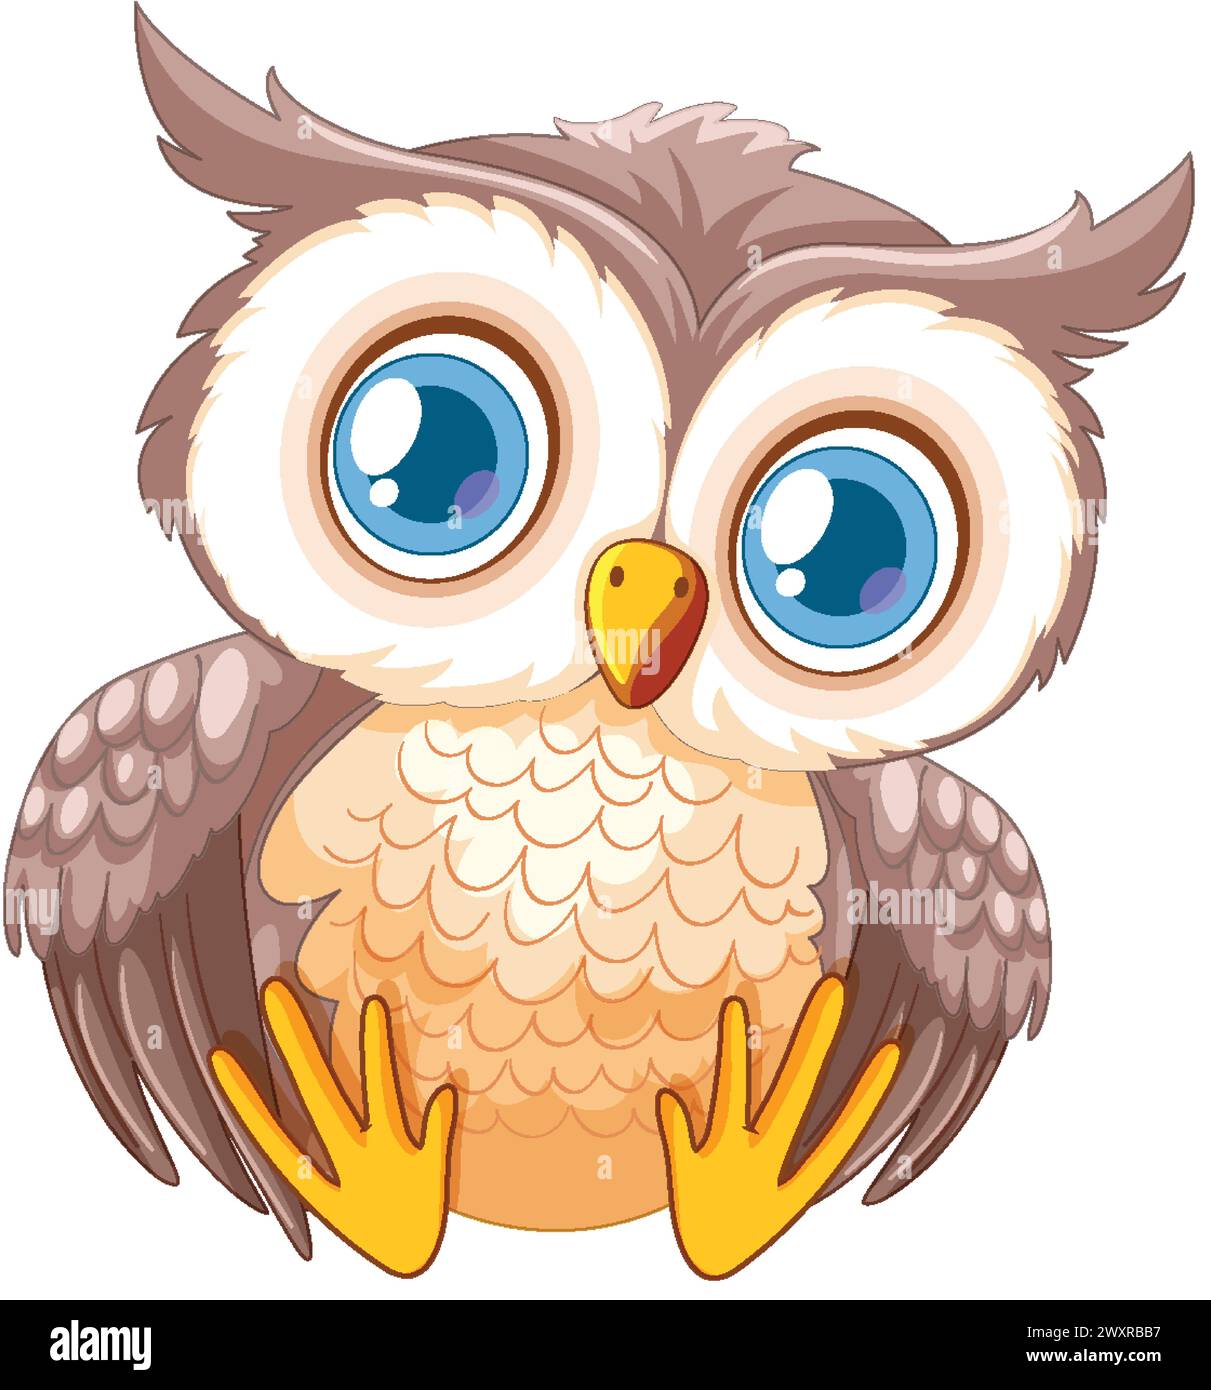 Cute, wide-eyed owl illustration in vector format Stock Vector